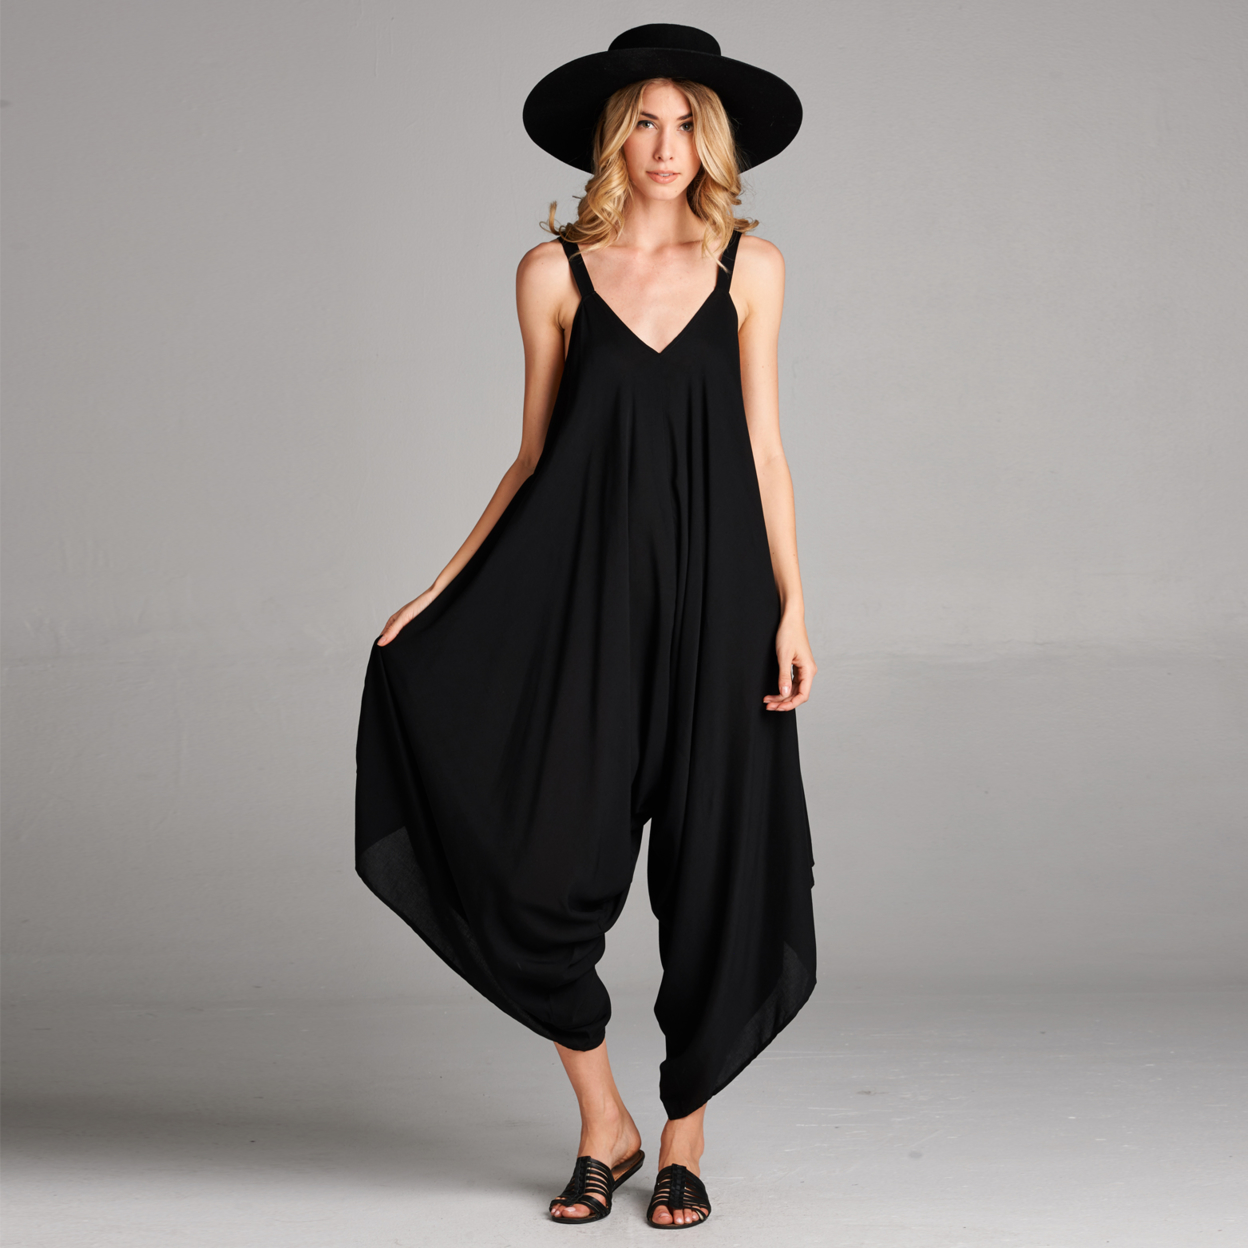 V-Neck Jumpsuit With Pockets - Black, Small (4-8)